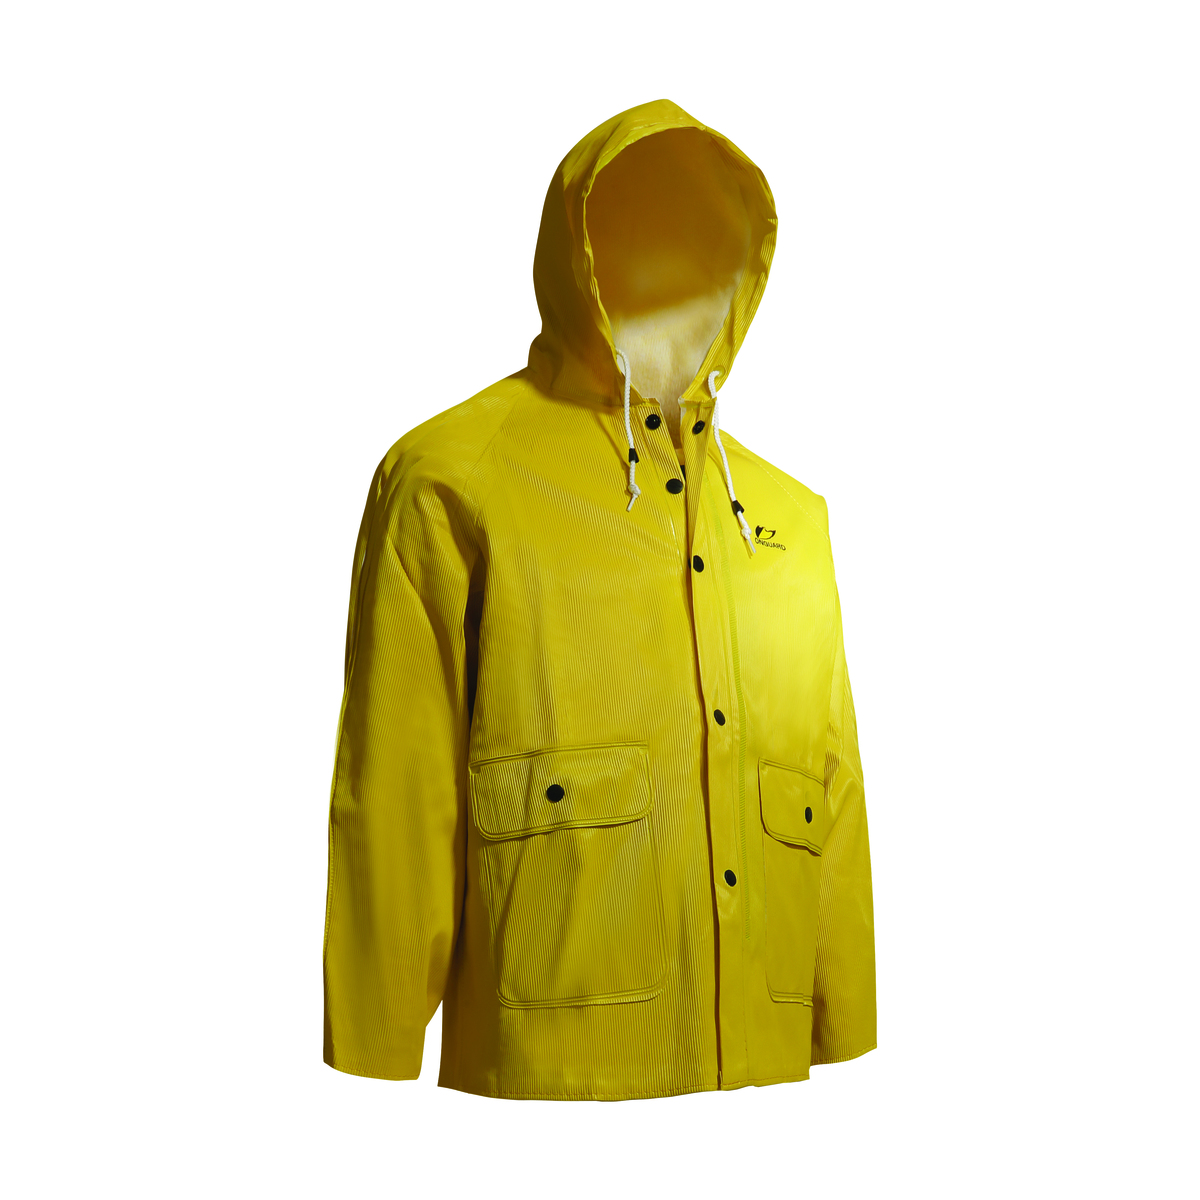 Dunlop® Protective Footwear X-Large Yellow Webtex .65 mm Polyester/PVC Rain Jacket With Attached Hood